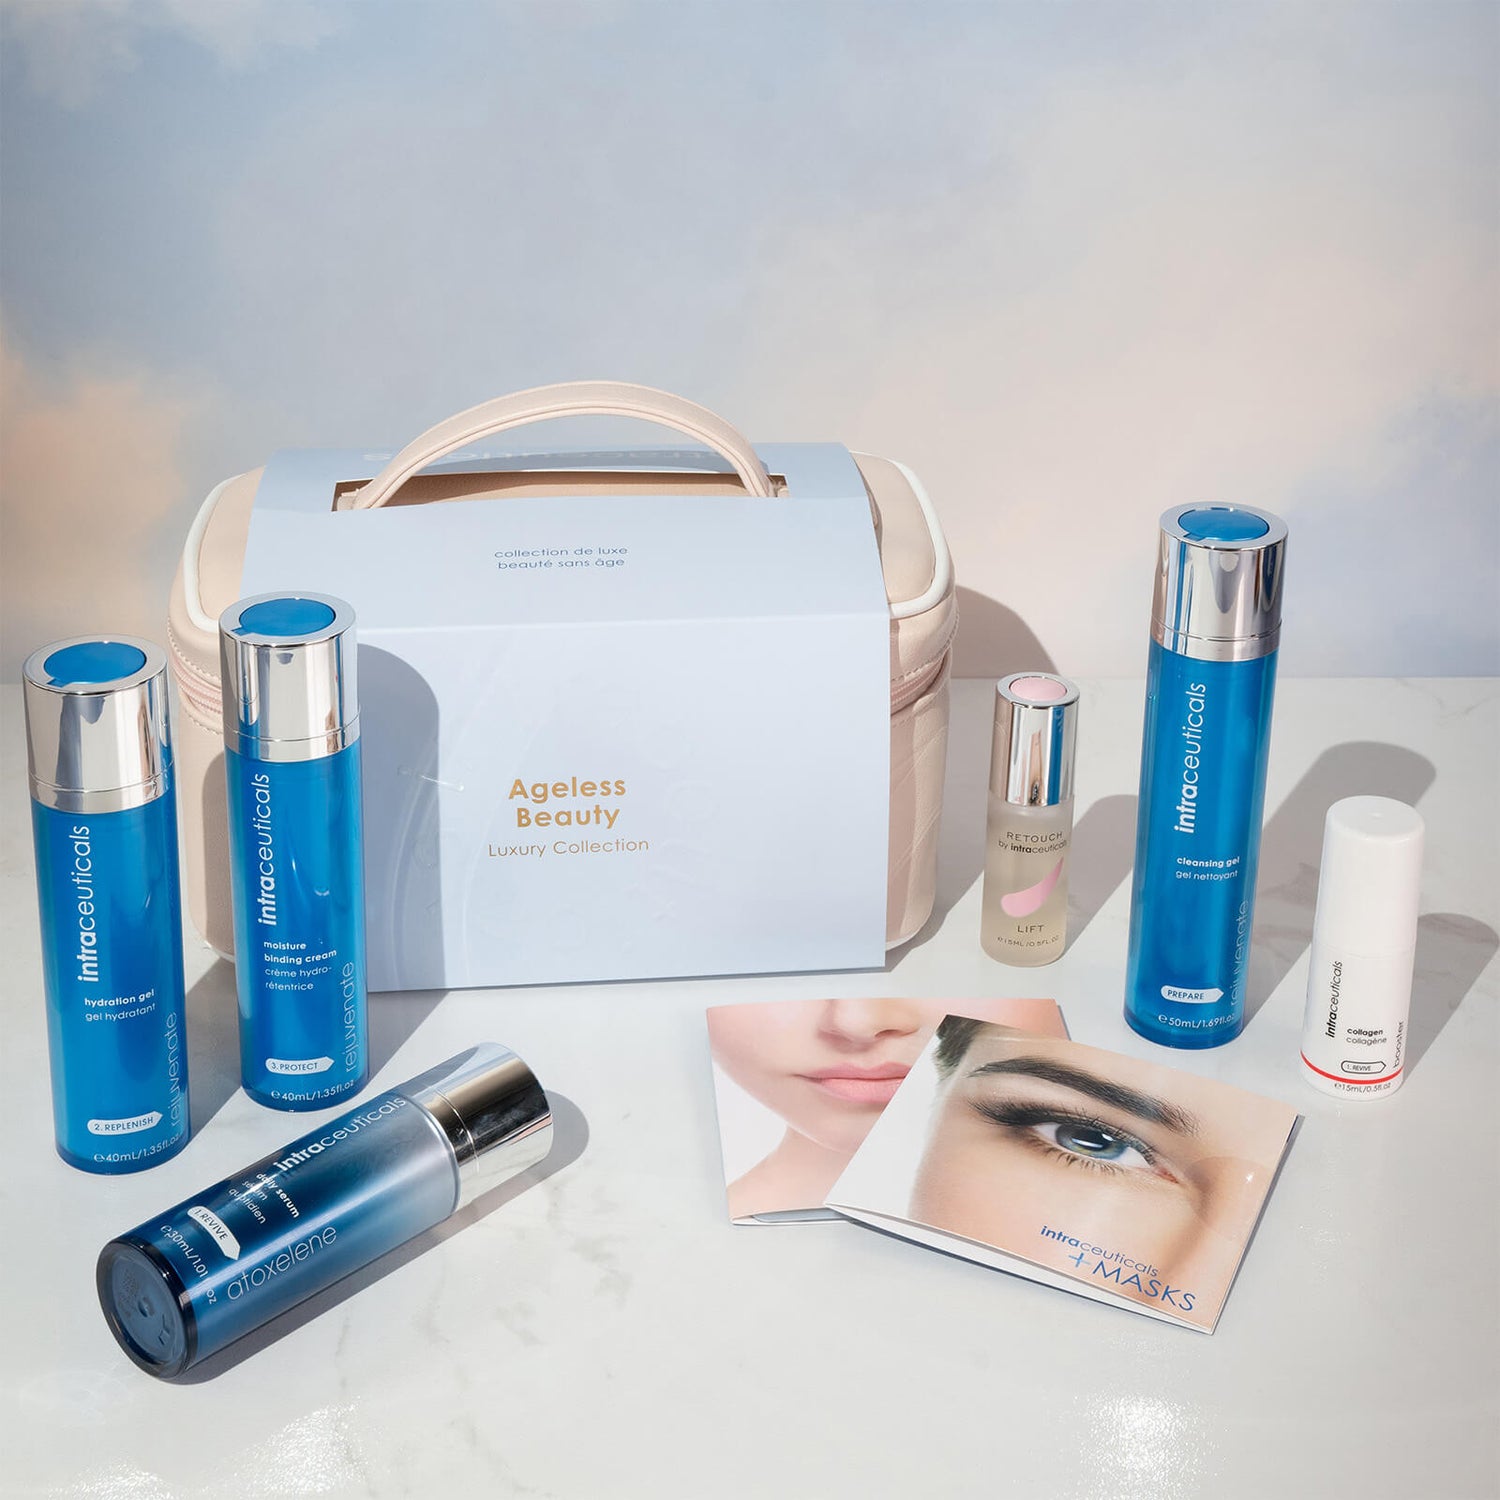 Intraceuticals Ageless Beauty Luxury Collection (Worth $496.00)